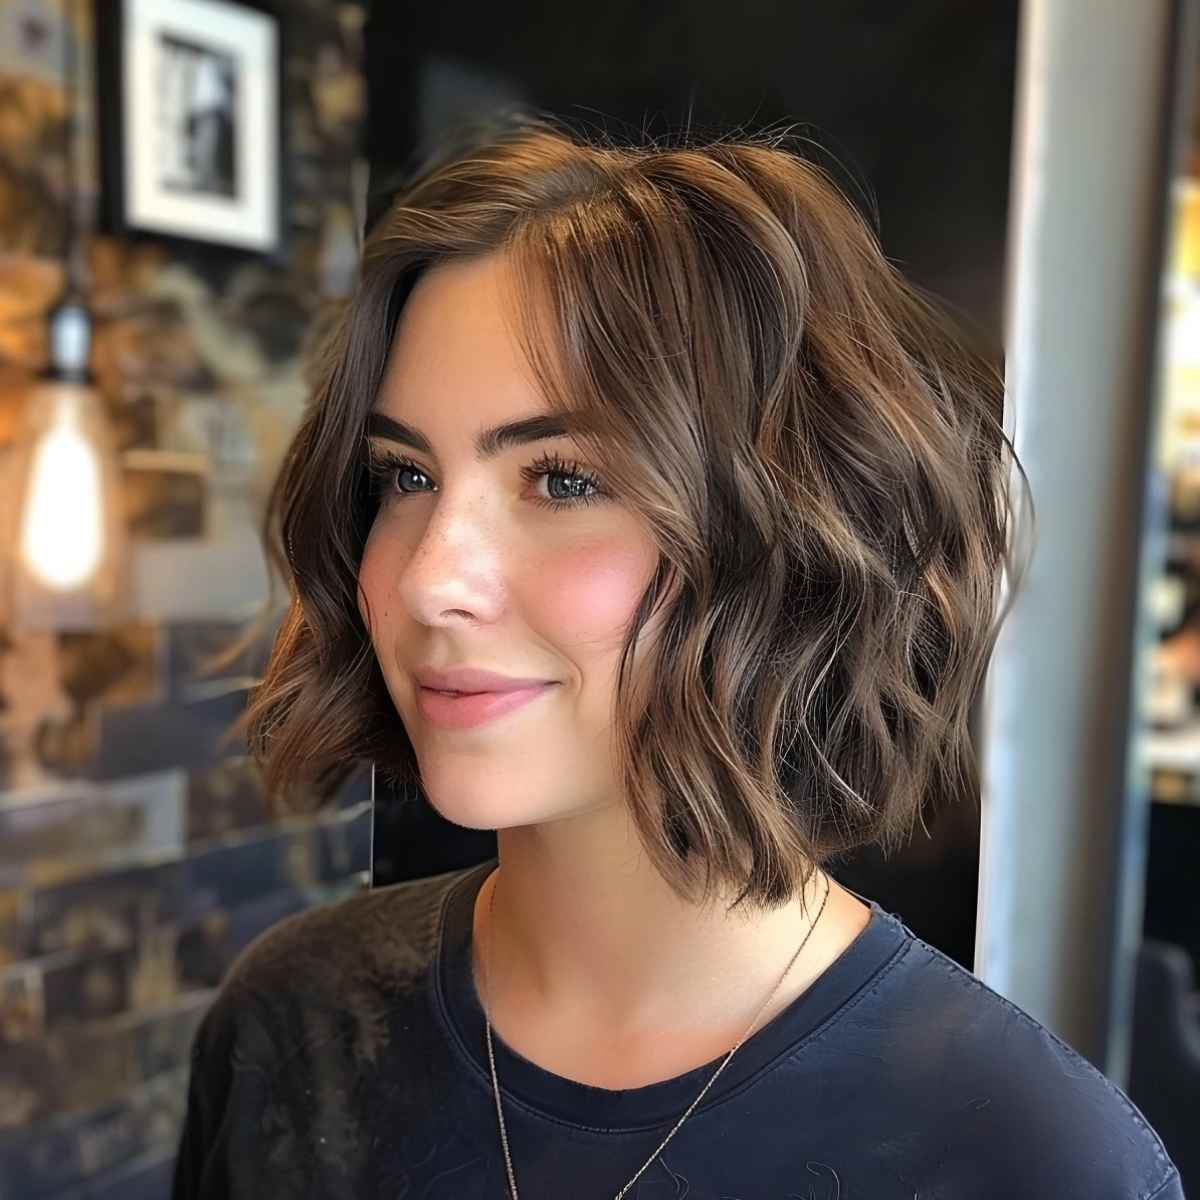 Textured Bob hairstyle